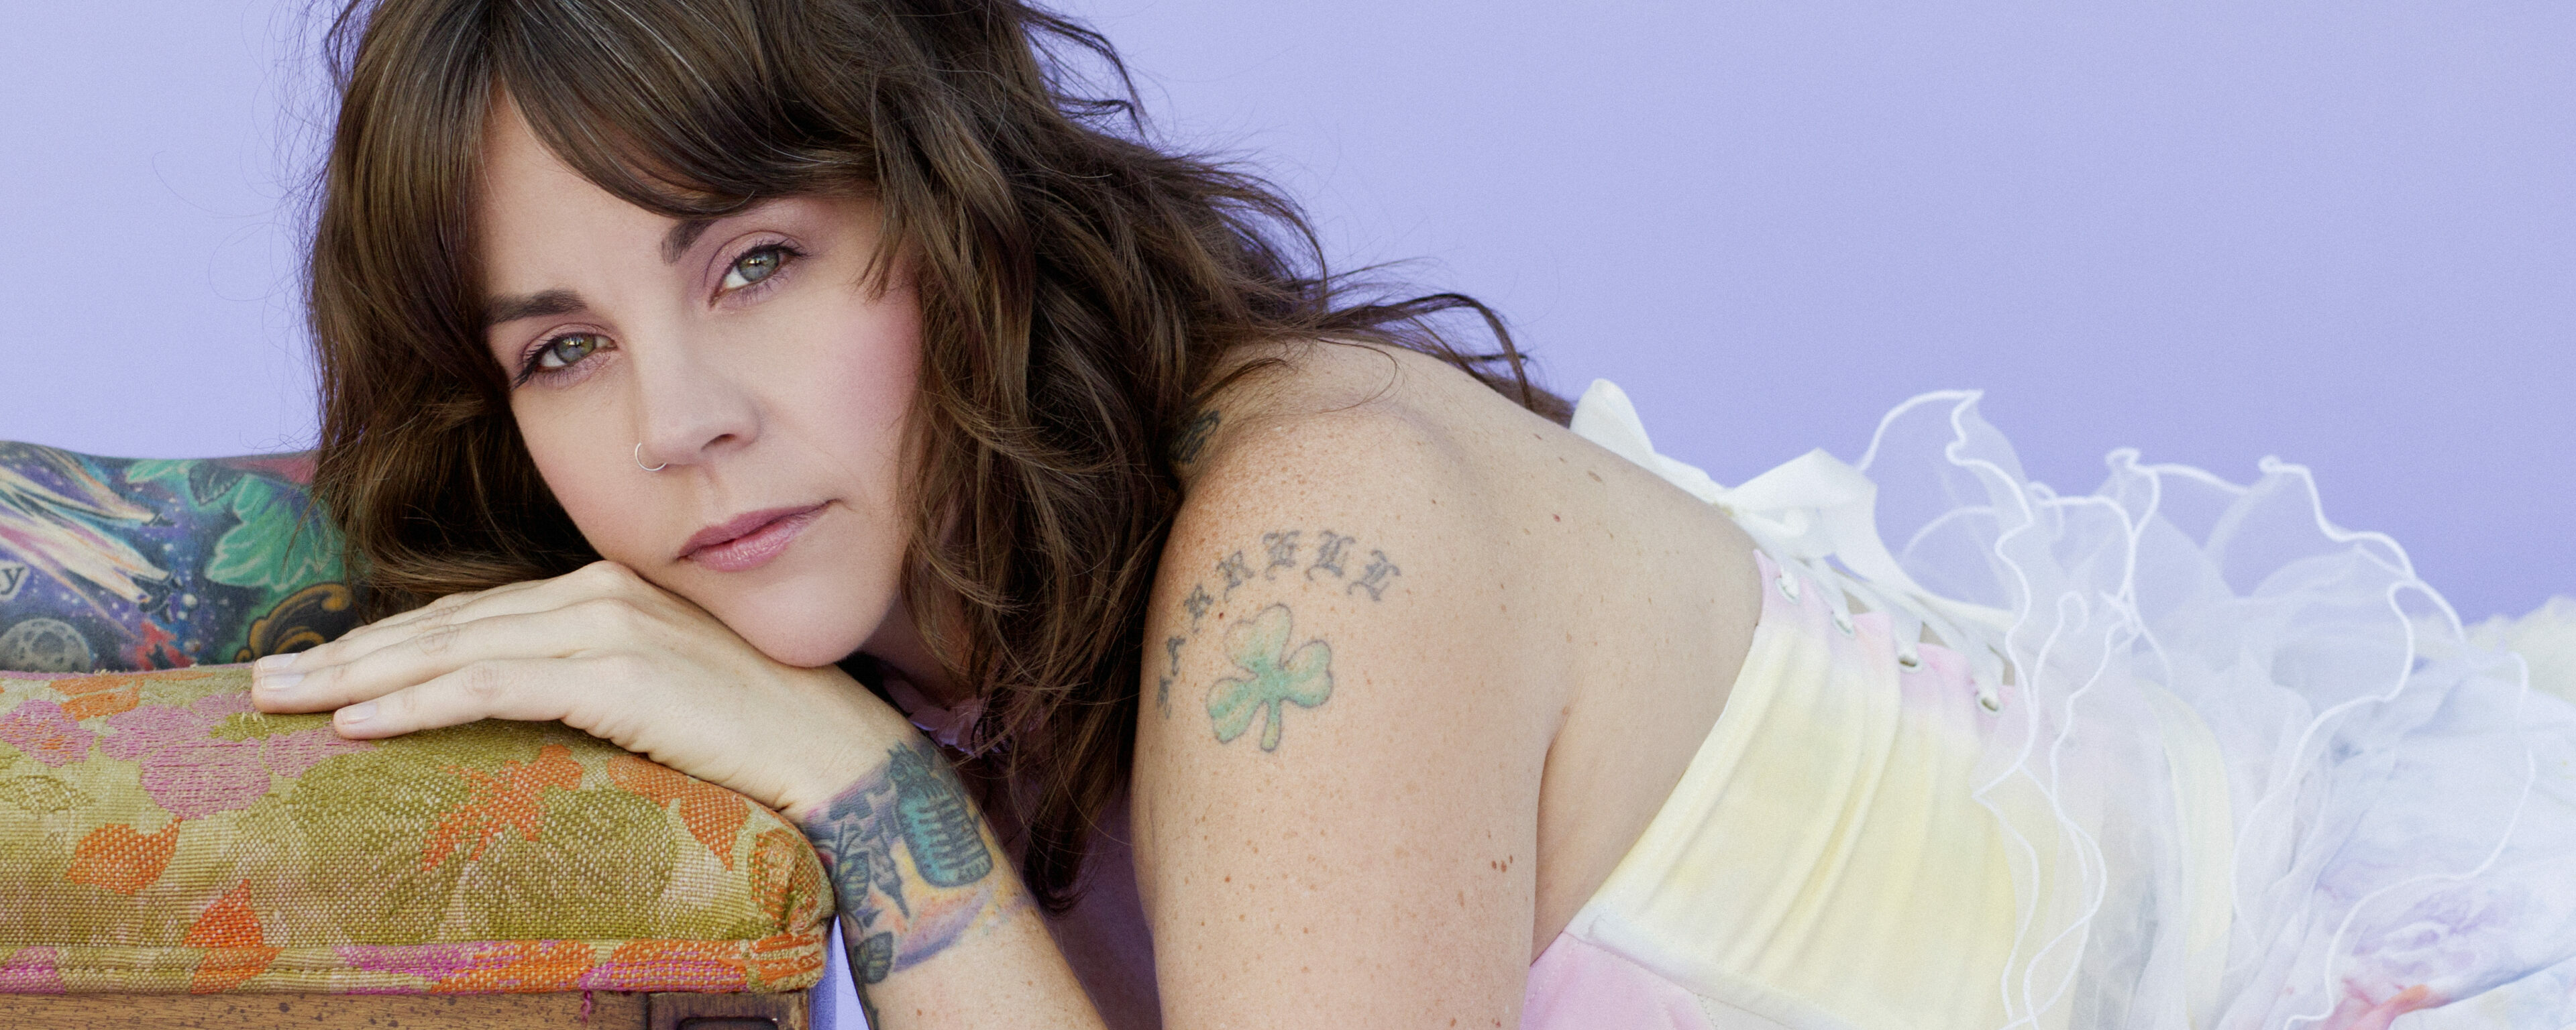 Meaghan Farrell Embraces Self-Love On New Single, “My Anarchy”